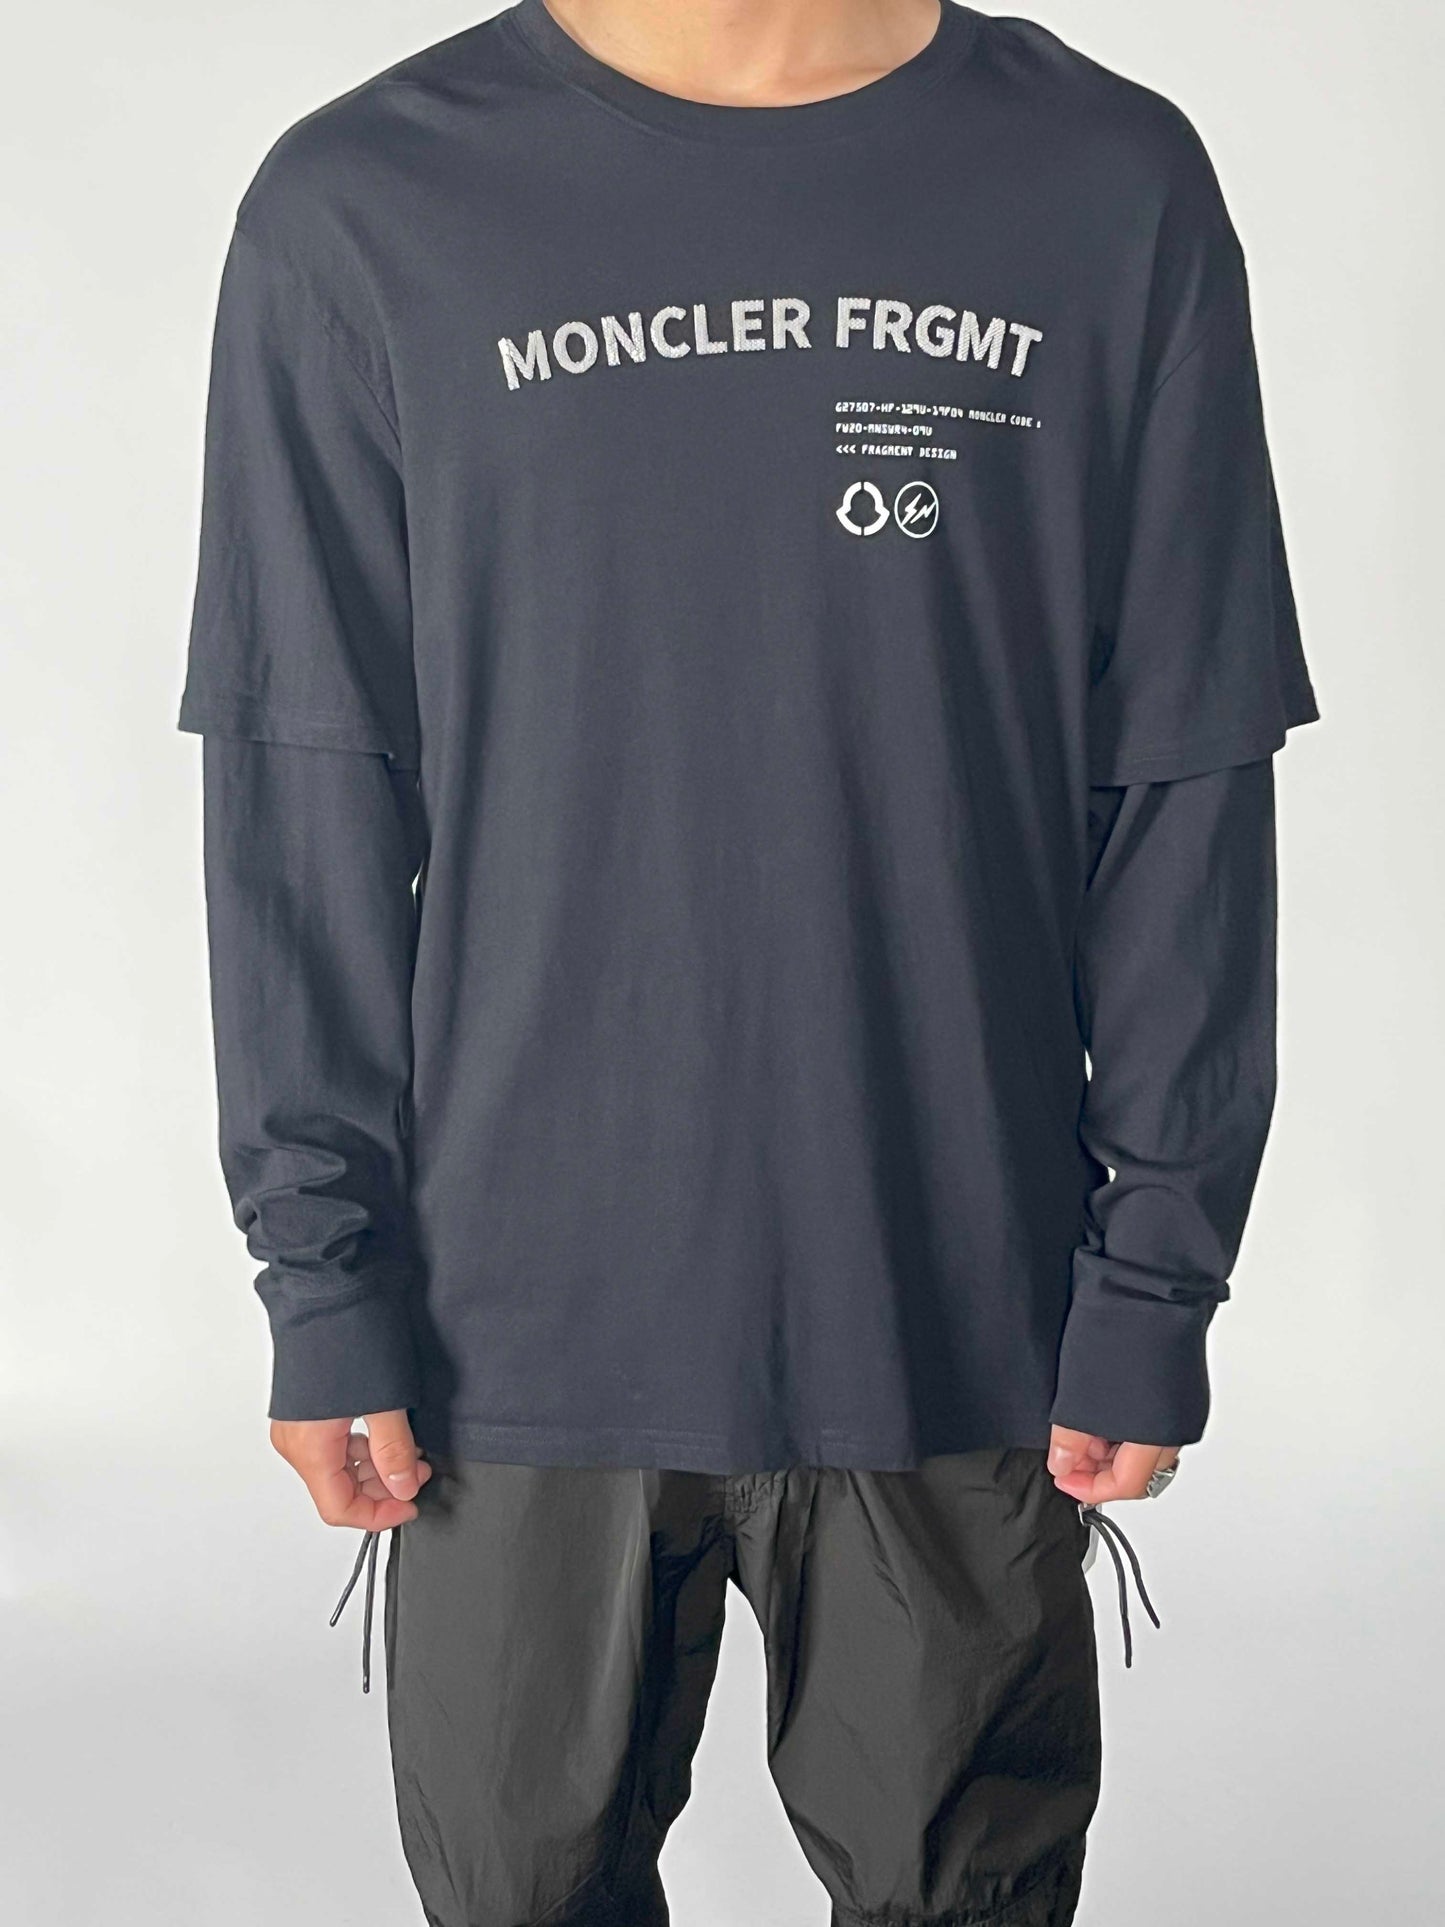 Moncler x Fragment Layered Style S/S TEE